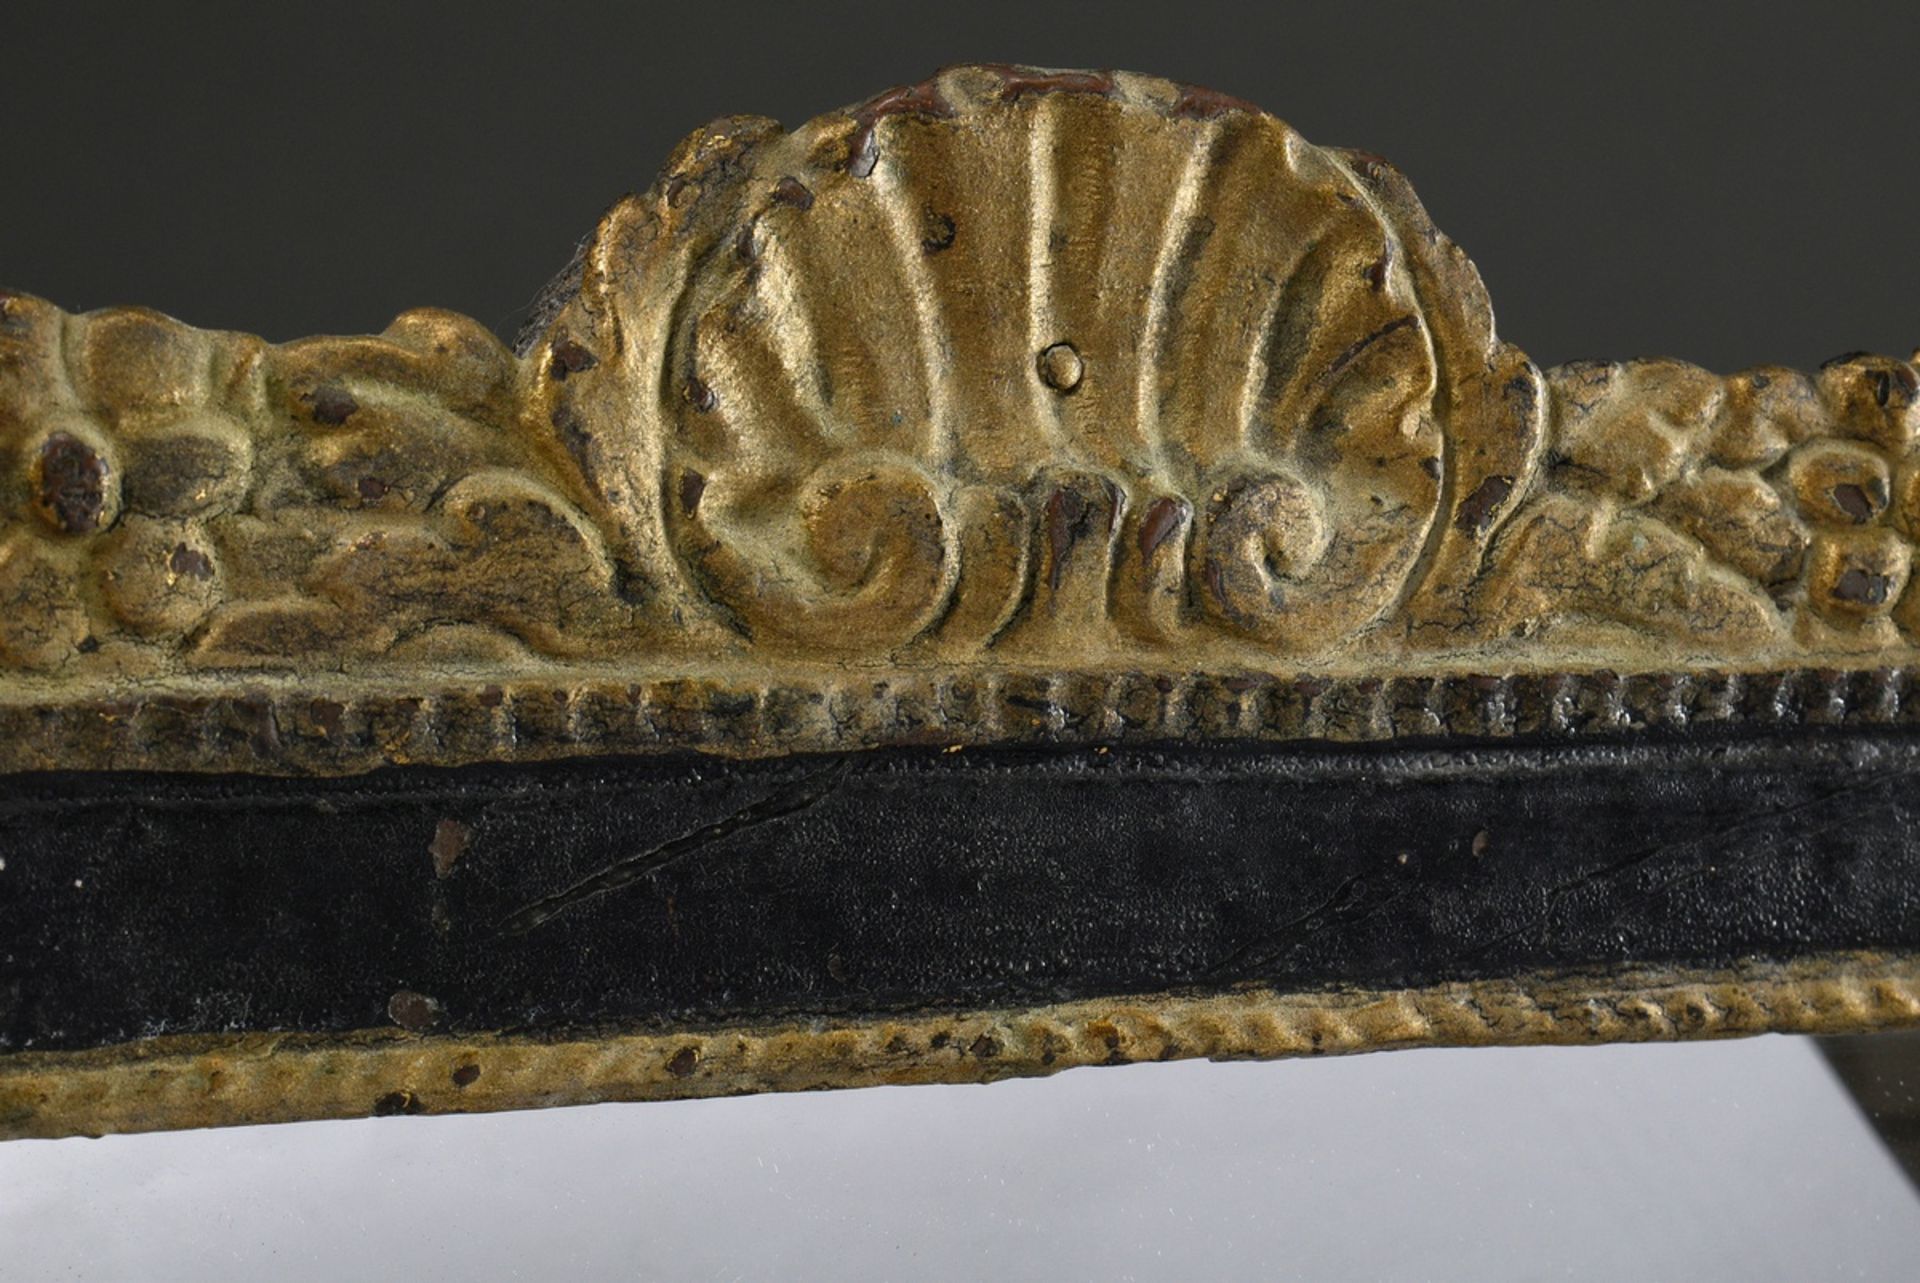 Small transverse mirror with rustic floral ornamentation and shell crowning, carved wood and black/ - Image 2 of 3